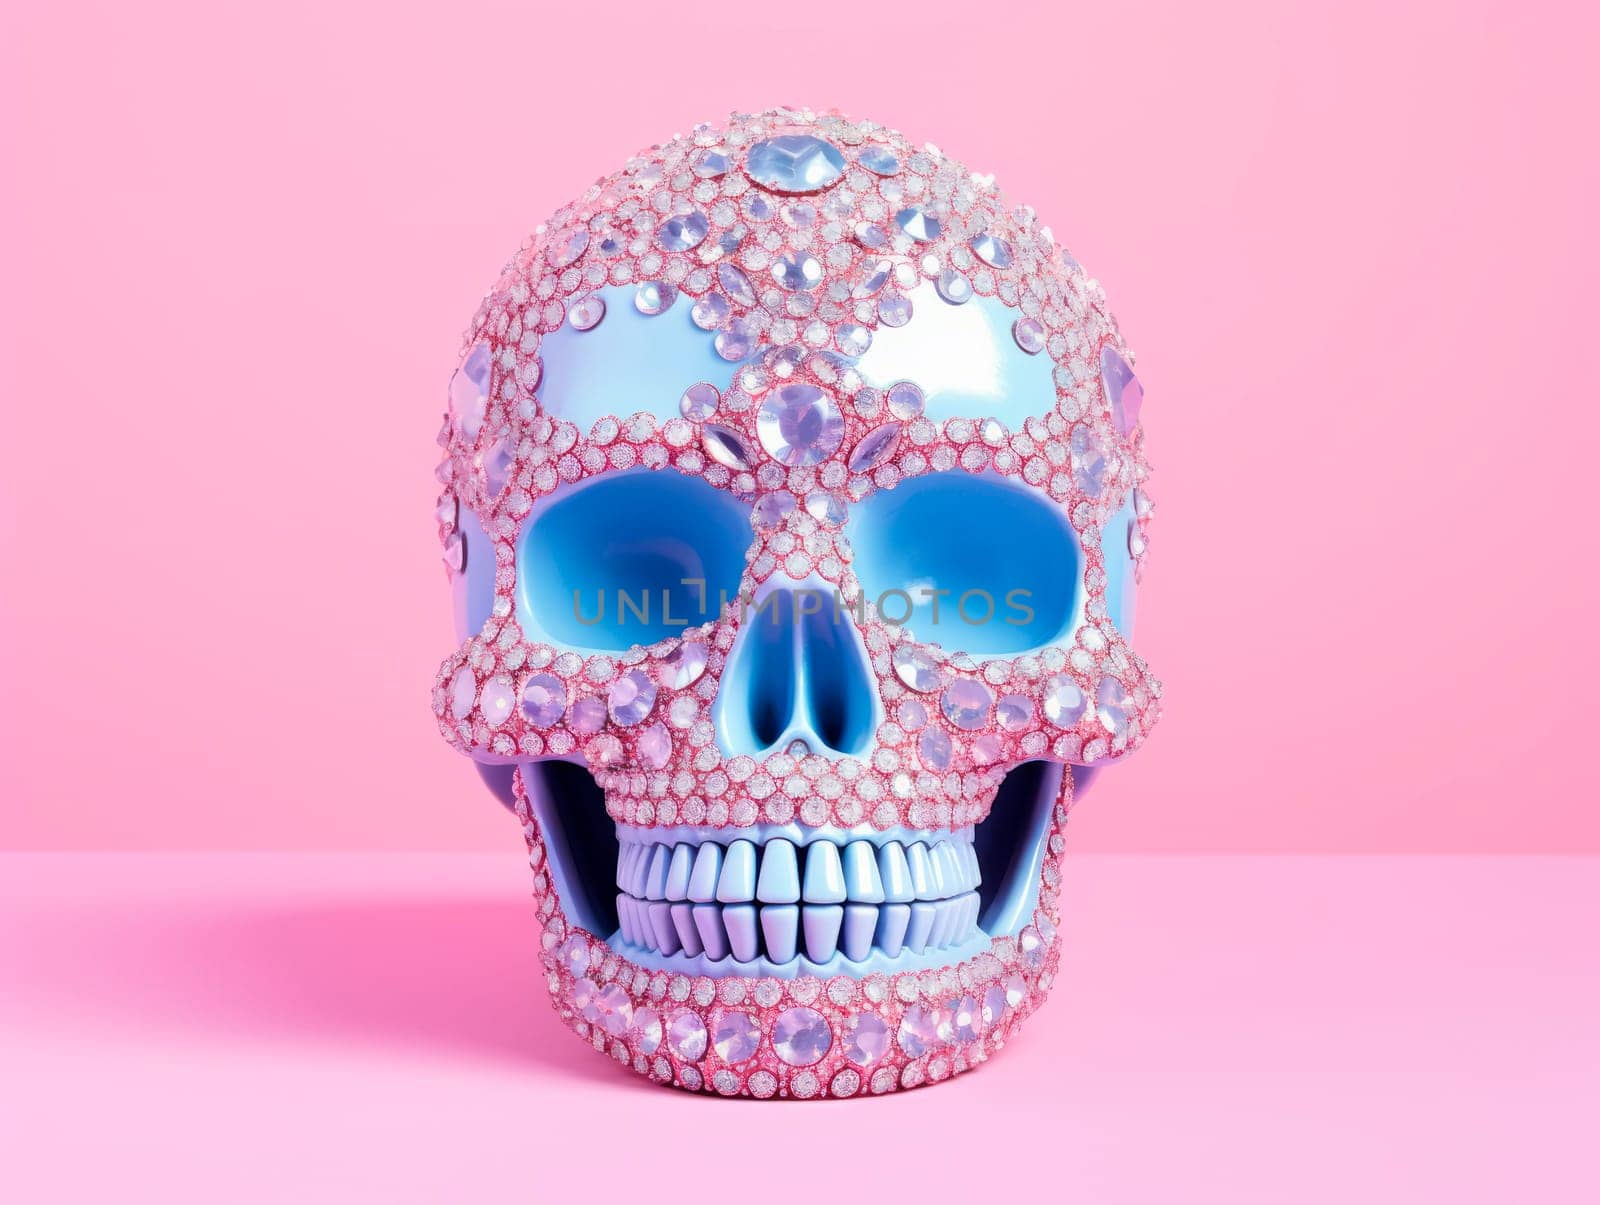 A skull decorated with shiny rhinestones on a bright background